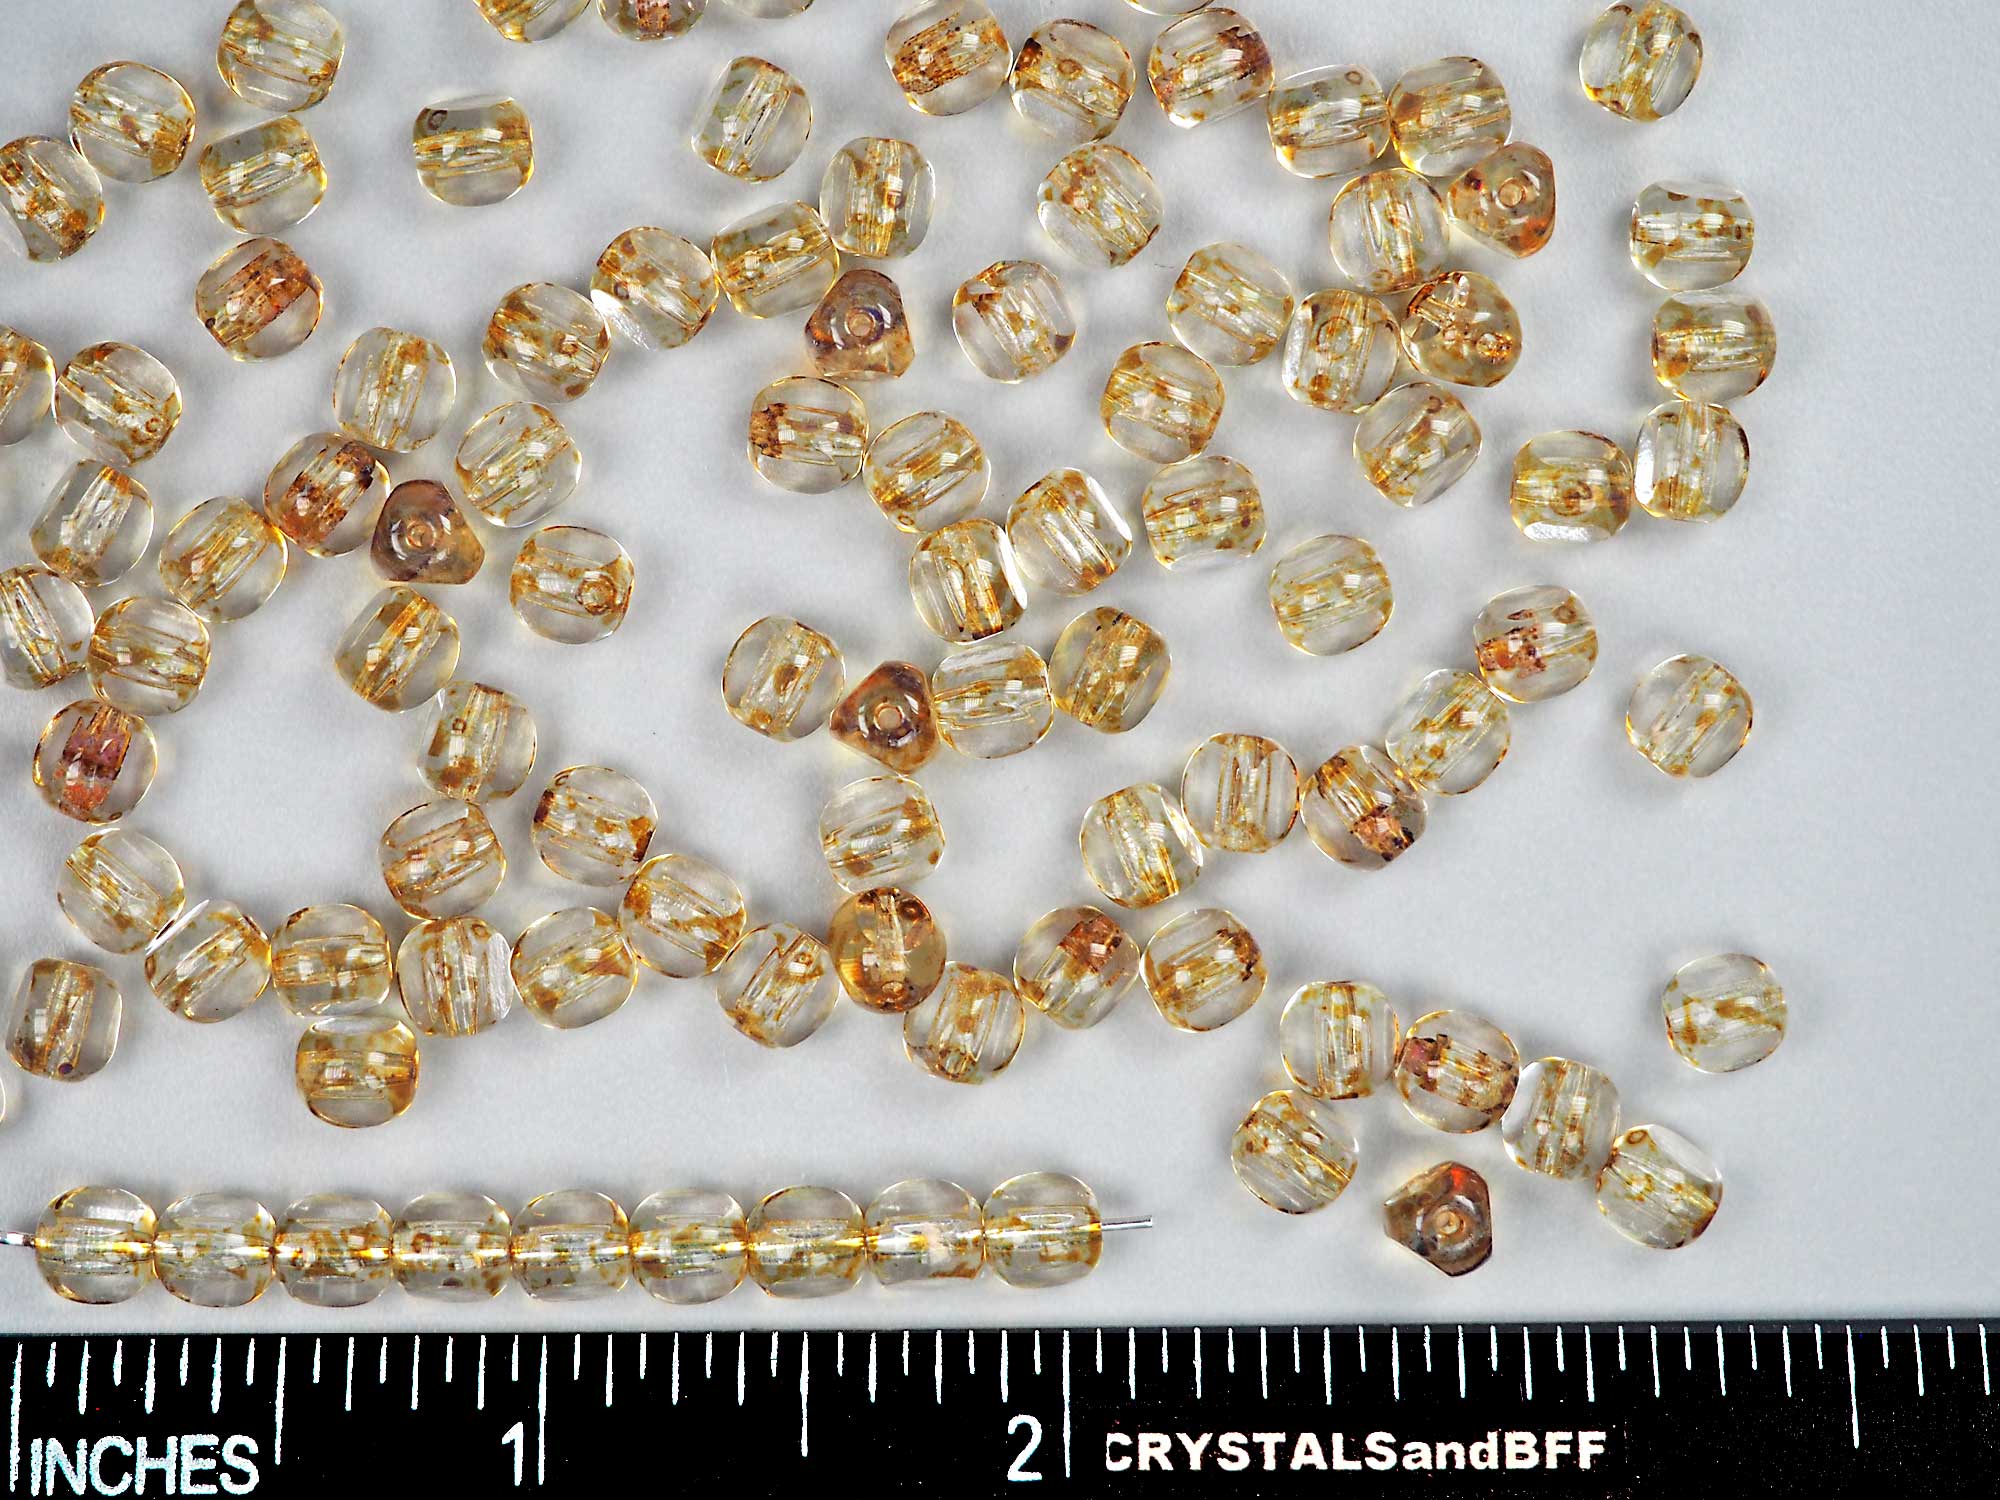 Czech Glass 3-Cut Round Window Beads (Soccer Ball Bead) Art. 151-19501 in size 6mm, Crystal Golden Picasso coating, 50pcs, P872